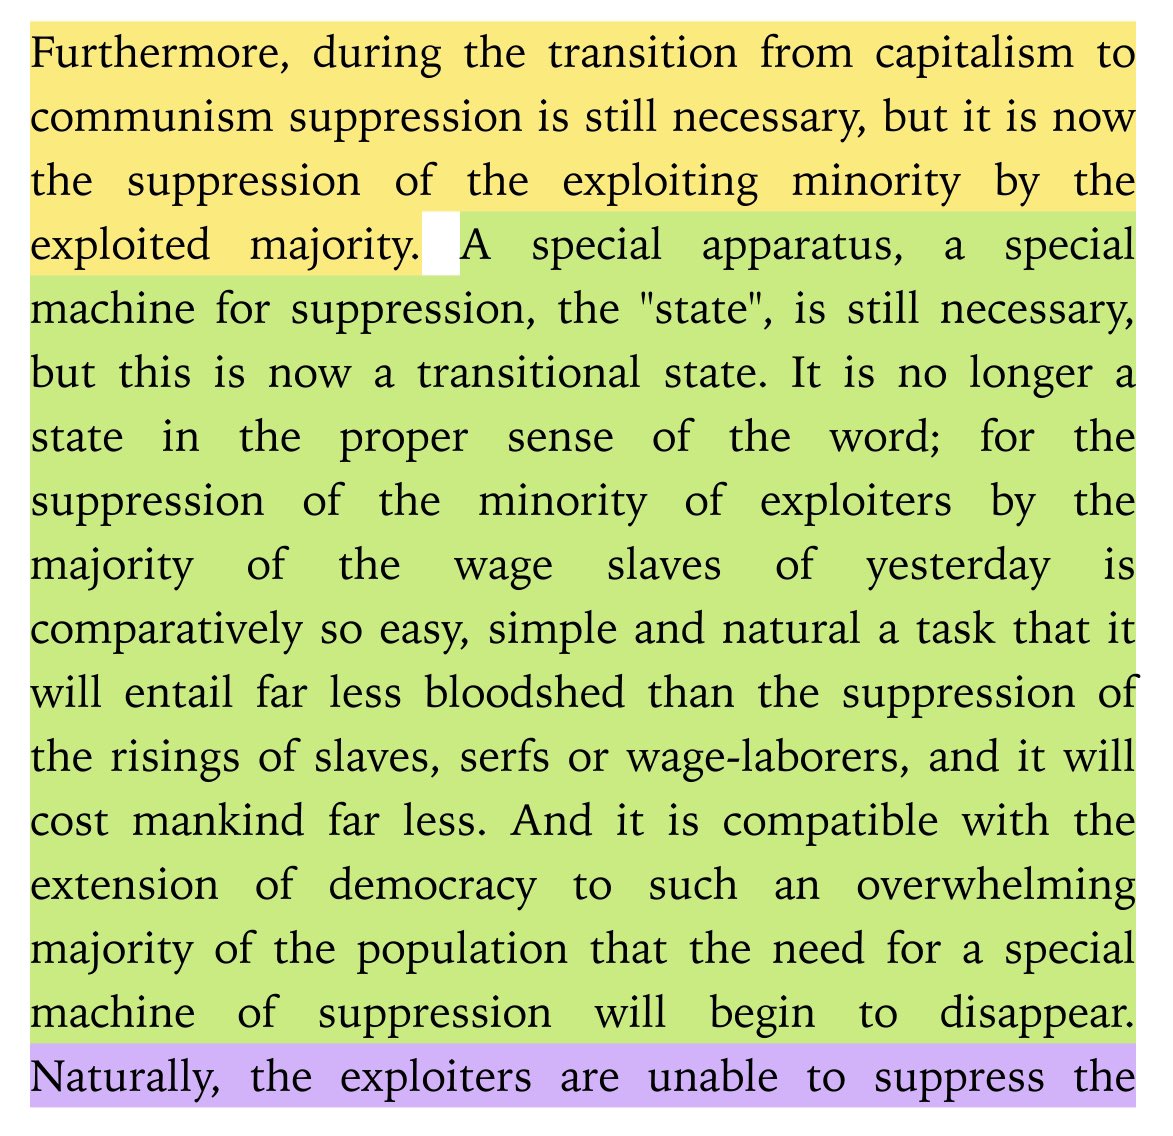 “furthermore, during the transition from capitalism to communism suppression is still necessary, but it is now the suppression of the exploiting minority by the exploited majority.”